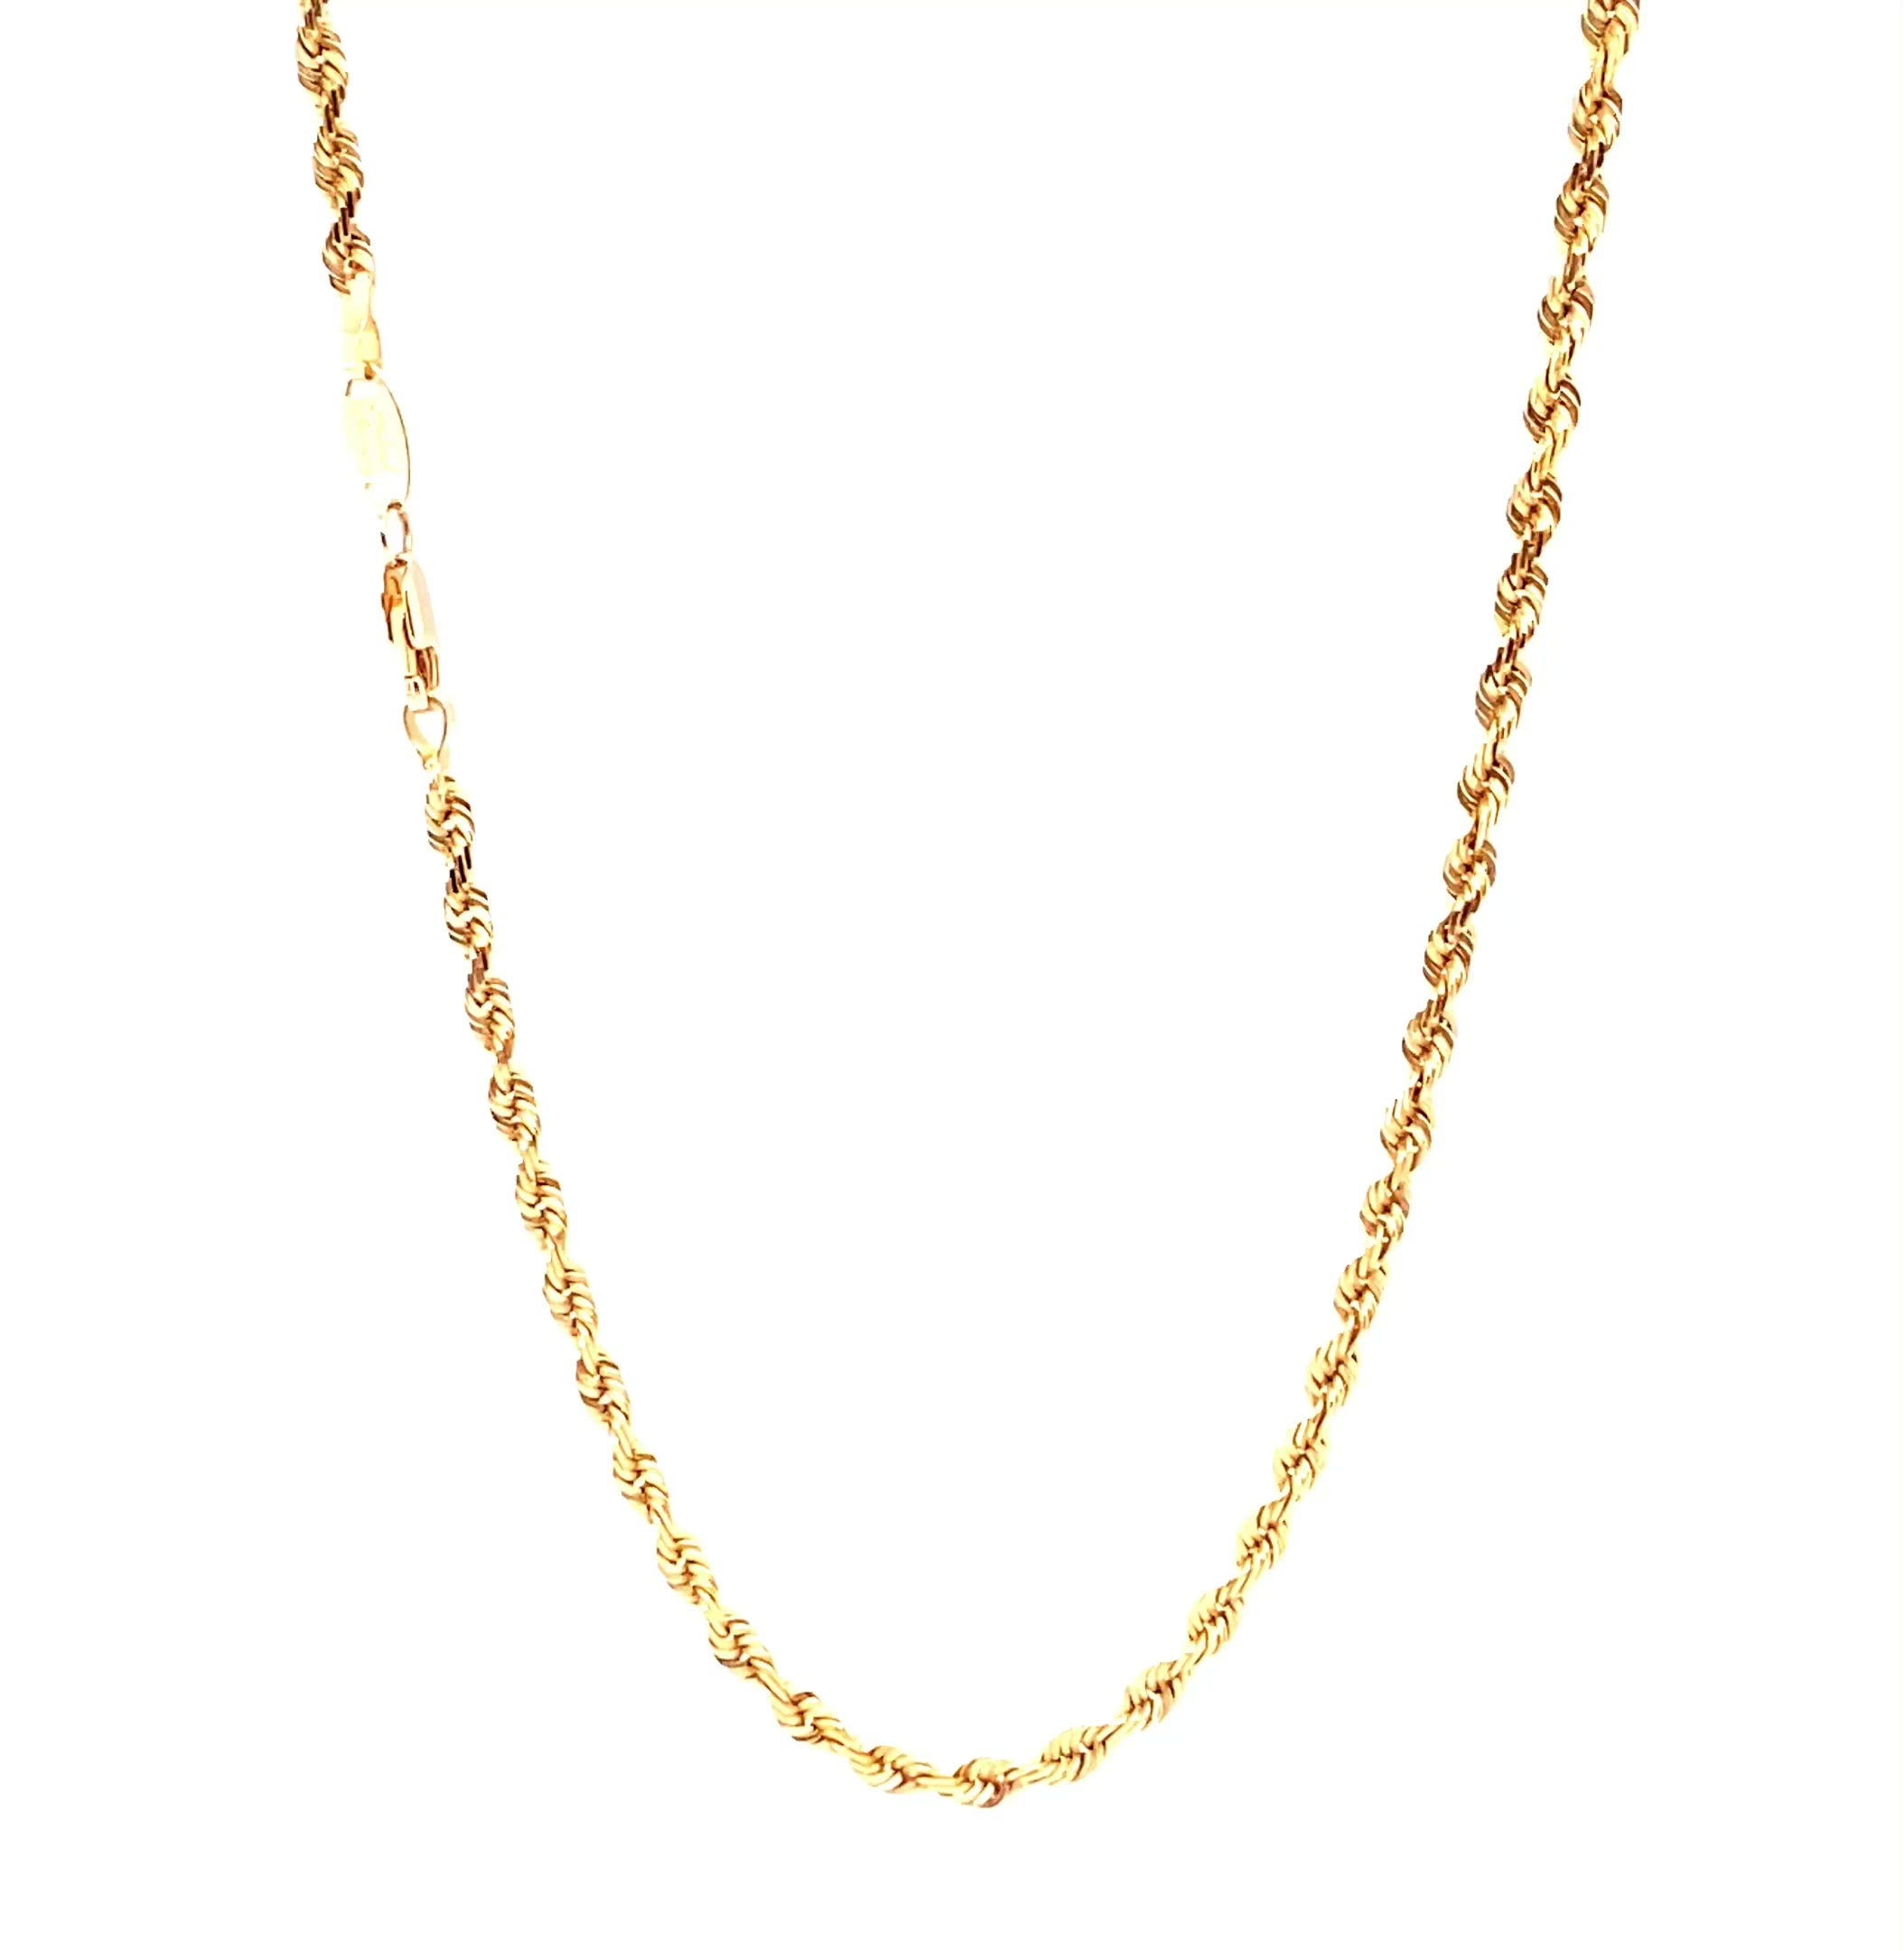 14K Solid Gold Diamond Cut Twist Rope Chain Necklace 18" 9.4 Grams 2.25mm Gold Chain Estate Necklace Vintage Necklace Fine Jewellery Jewelry